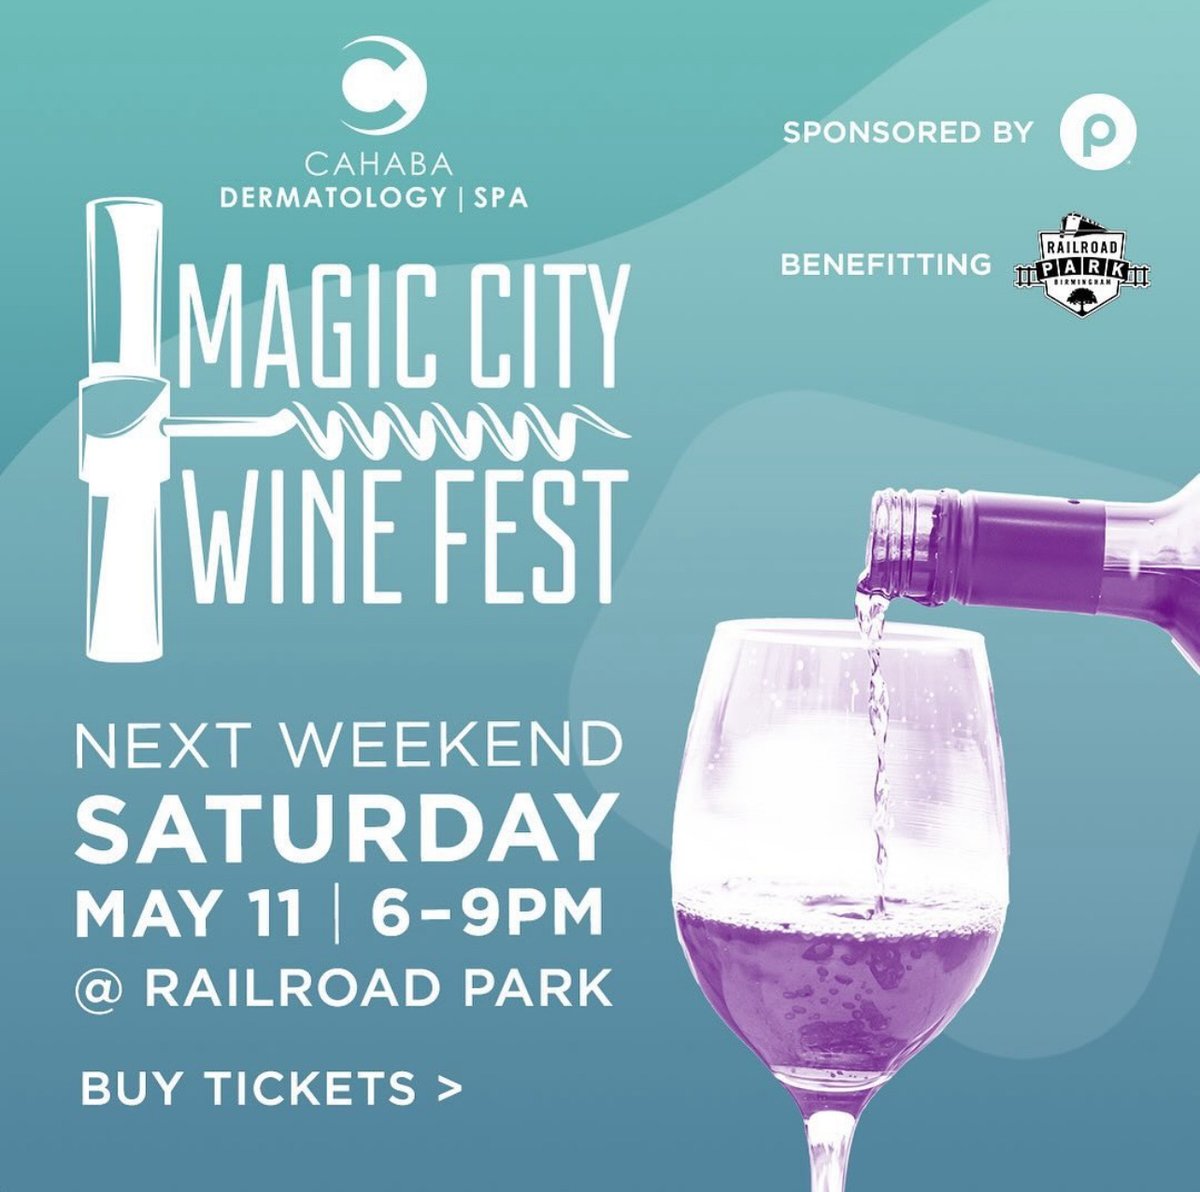 Travel the world through wine-tasting and support our friends at Railroad Park while you’re at it at Saturday’s Magic City Wine Fest! 🥳🍷 Get your tickets today at magiccitywinefest.com👌 #inbirmingham